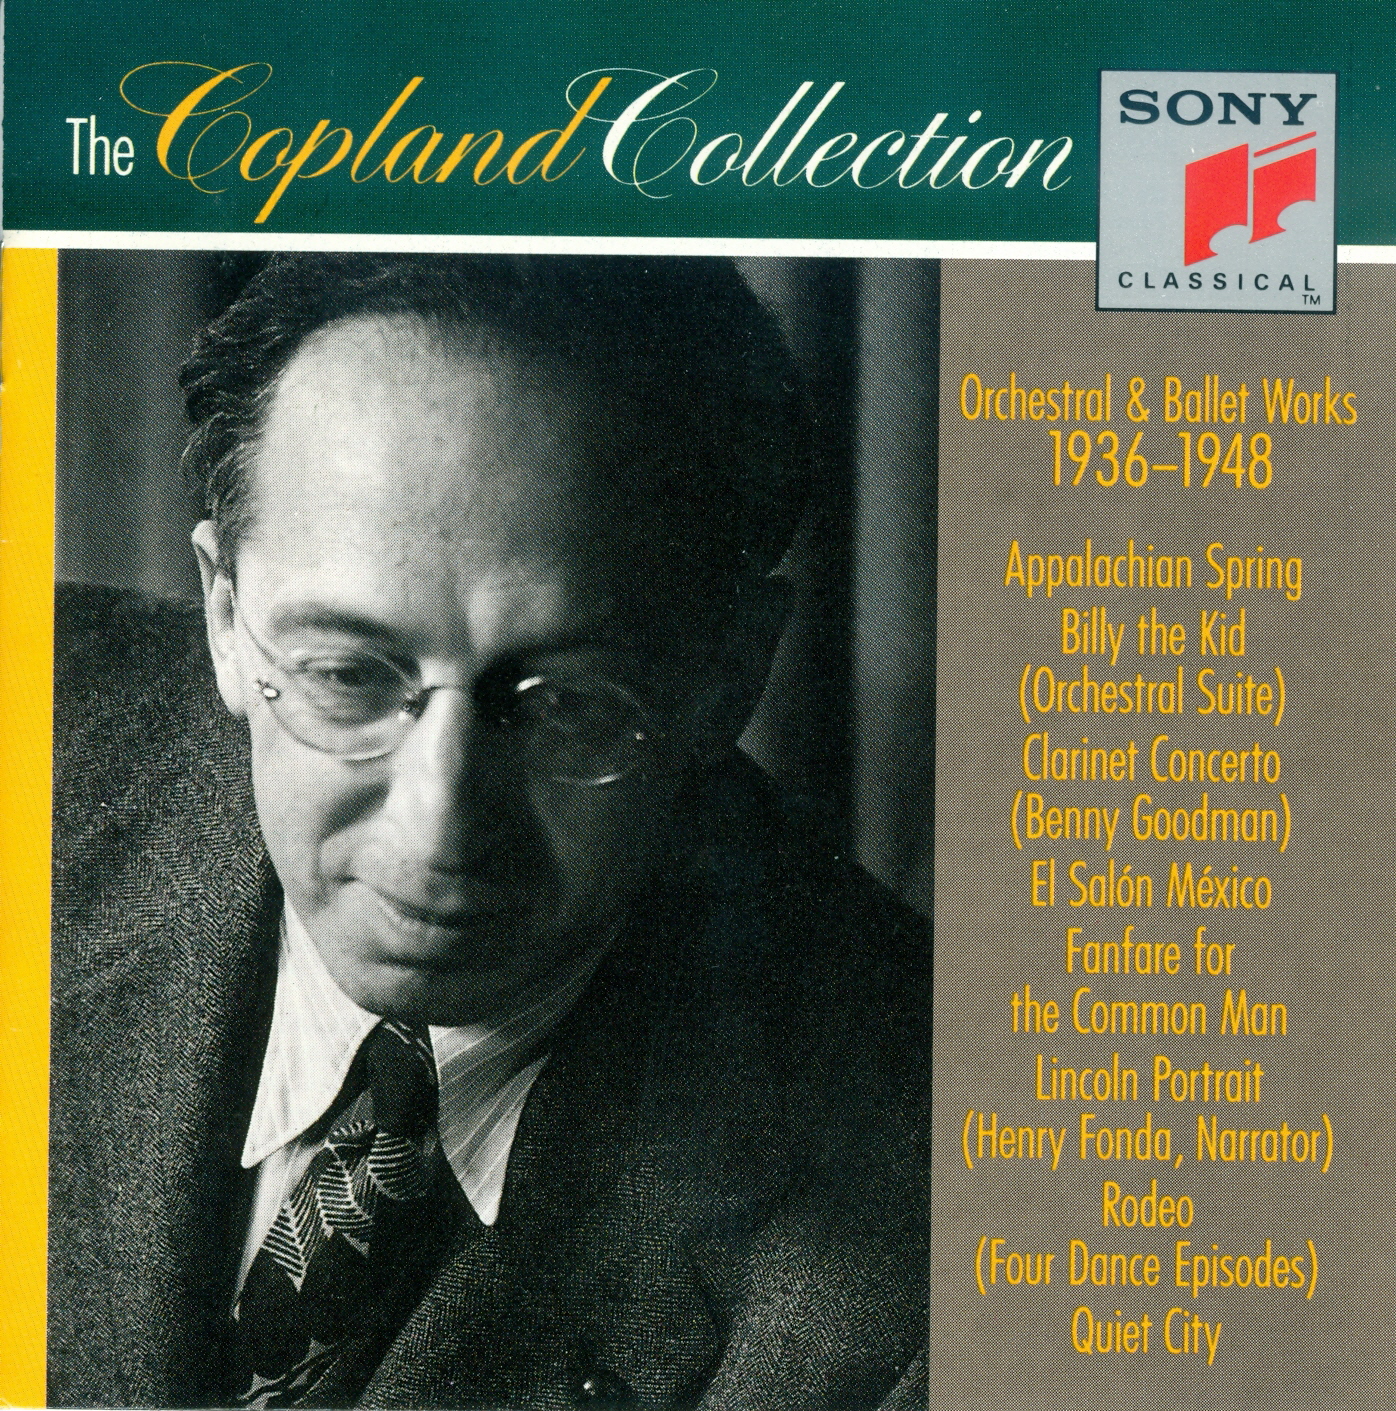 Aaron Copland - The Copland Collection 1936-1948 - Disc 2